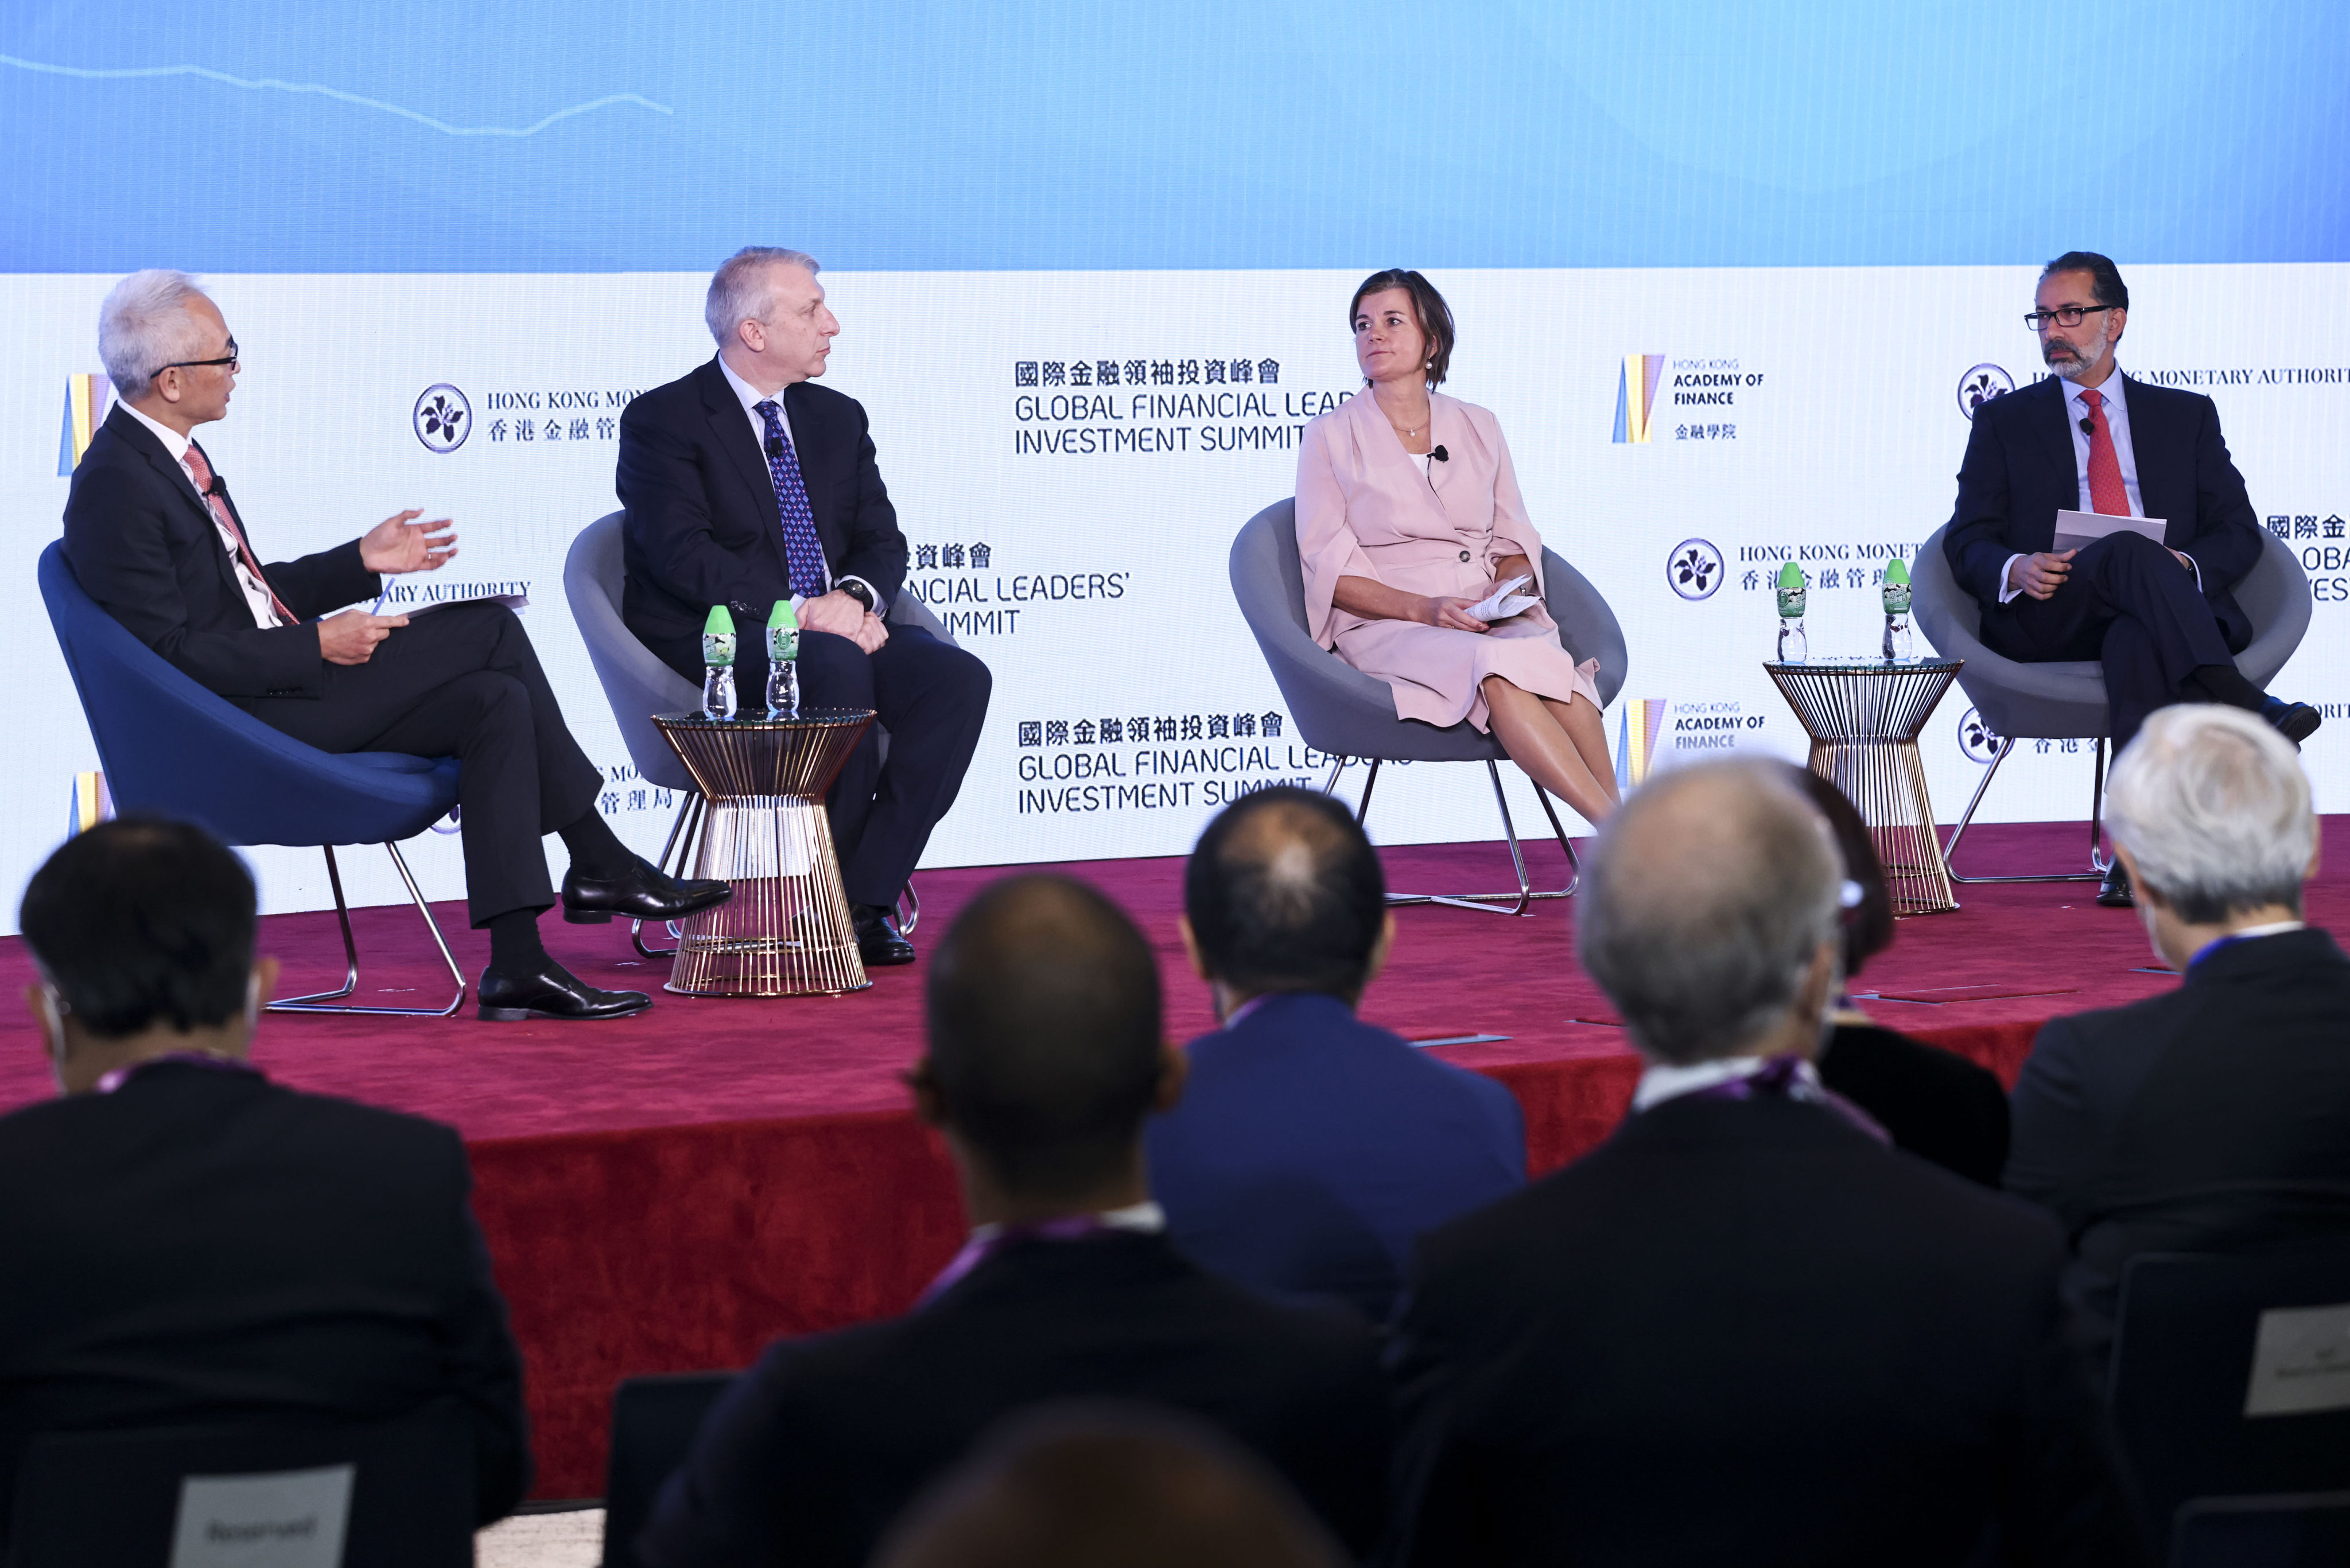 Howard Lee (left), Deputy CEO of HKMA moderates a panel at the Global Financial Leaders’ Investment Summit on Thursday. Stephen Klar of Wellington Management, Hanneke Smits of BNY Mellon Investment and Cyrus Taraporevala of State Street take part in the discussion. Photo: K.Y. Cheng